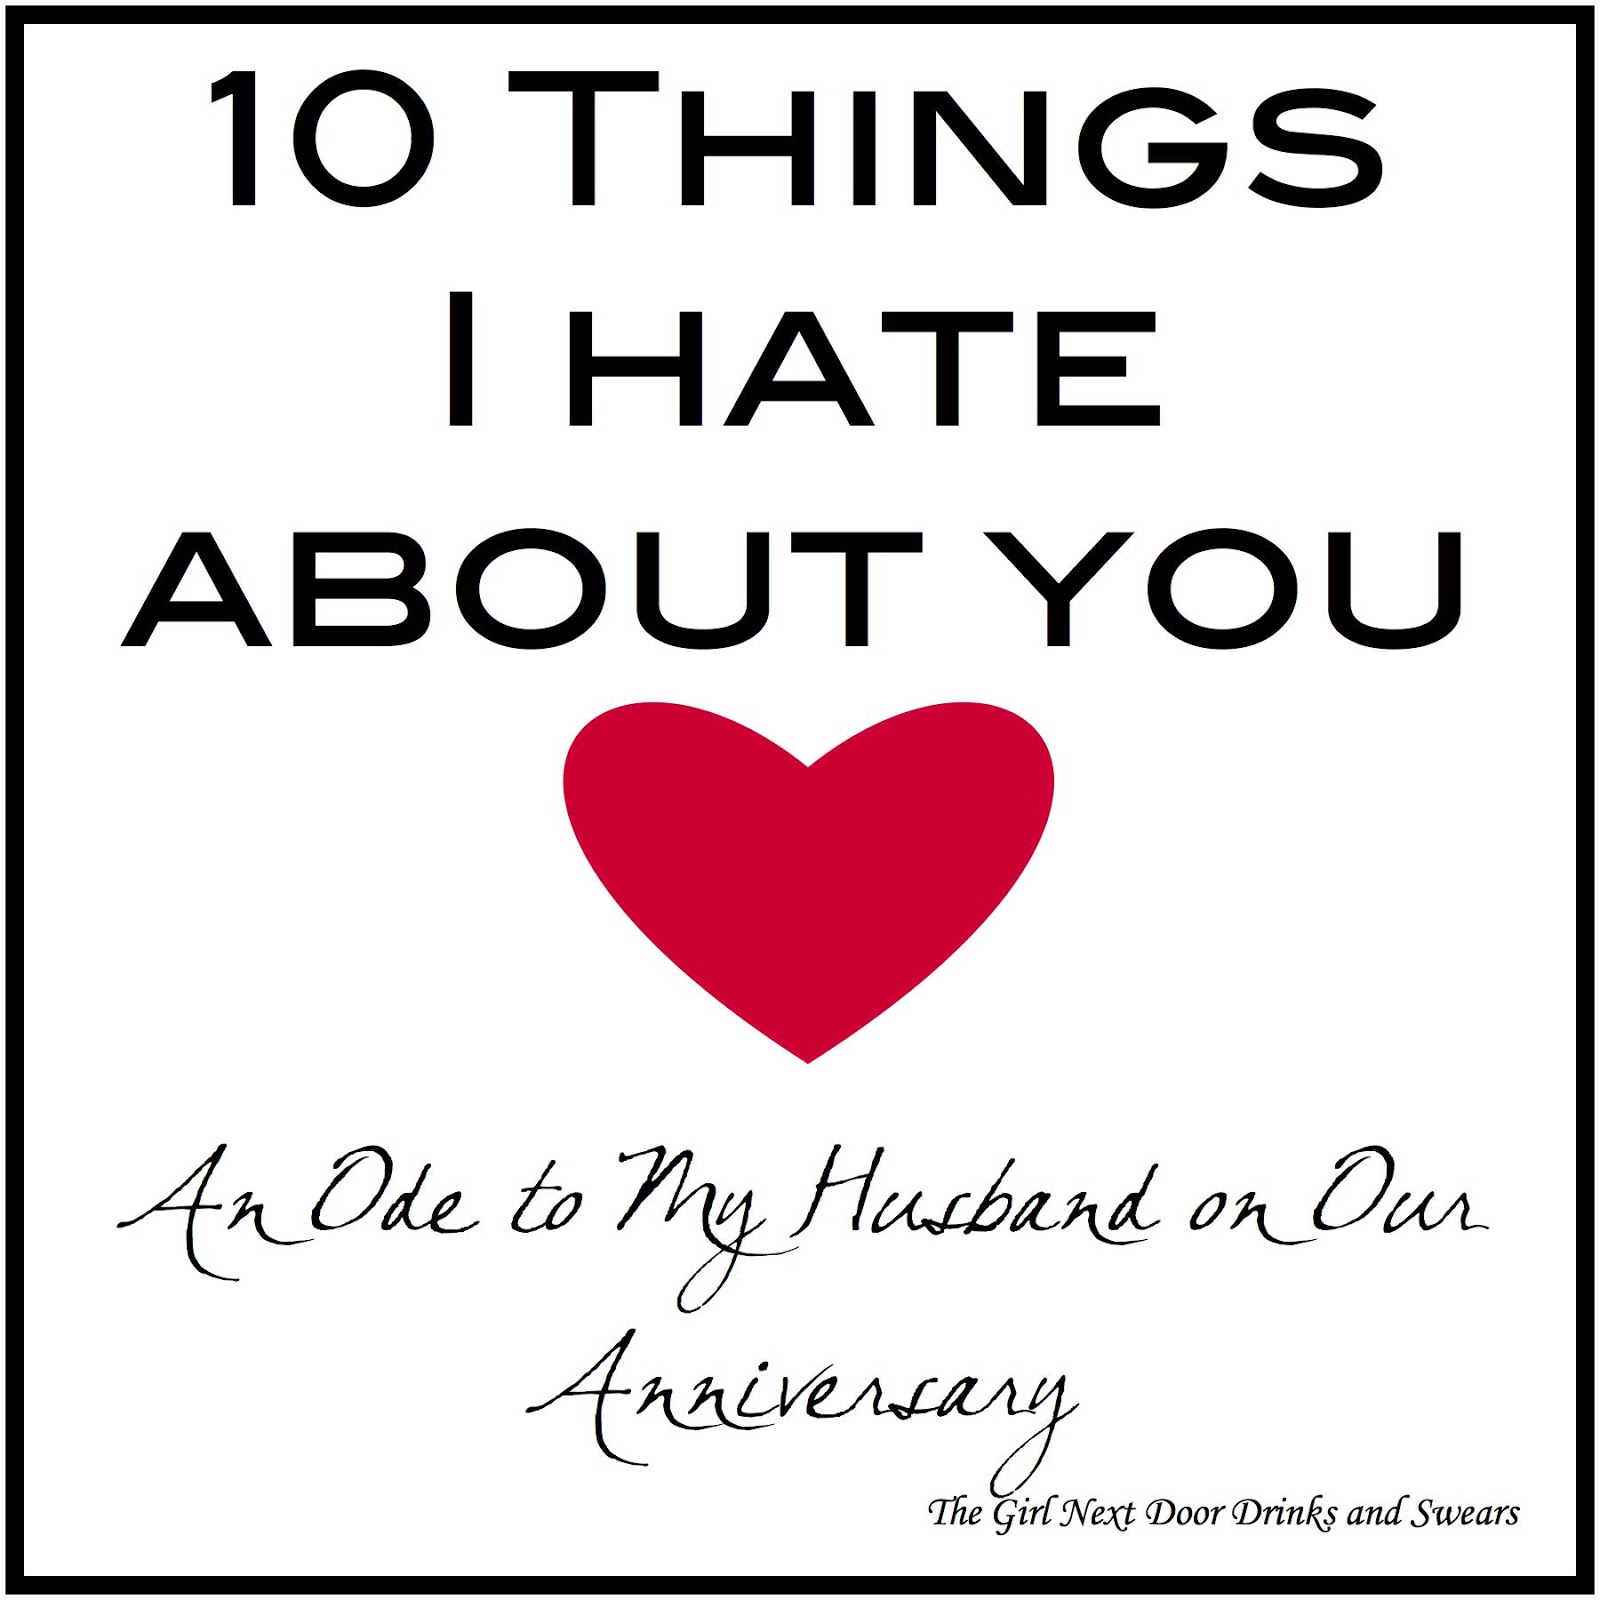 10 Things I Hate About You An Ode to My Husband on Our Anniversary